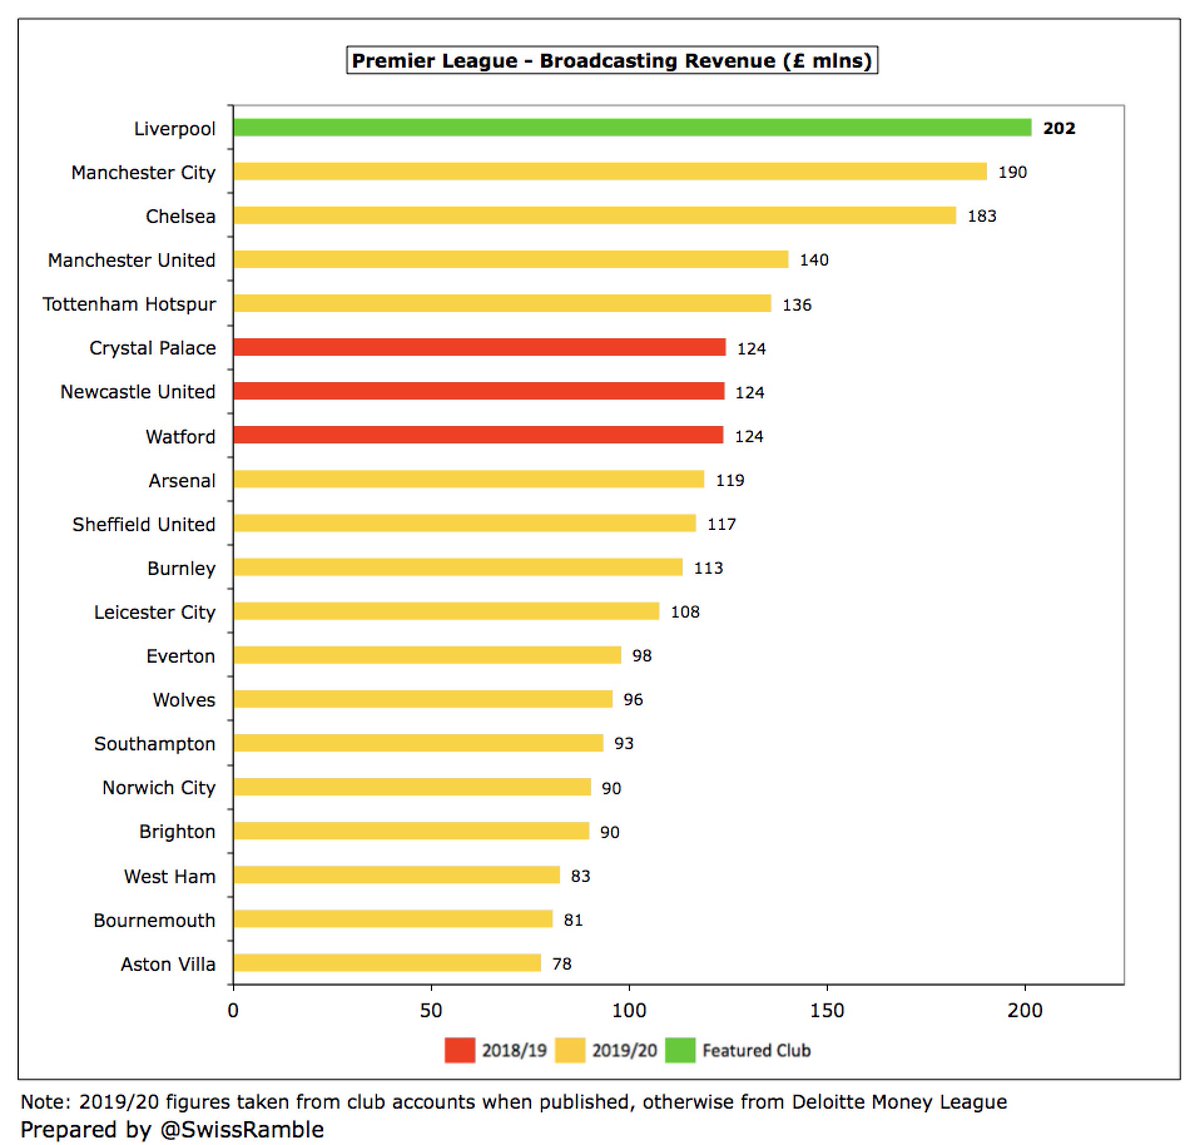  #LFC broadcasting income fell £59m (23%) from £261m to £202m. Premier League significantly impacted by revenue from 9 games slipping to 2020/21 accounts and rebate to broadcasters. However, still highest in England and second highest worldwide, only surpassed by Barcelona £218m.